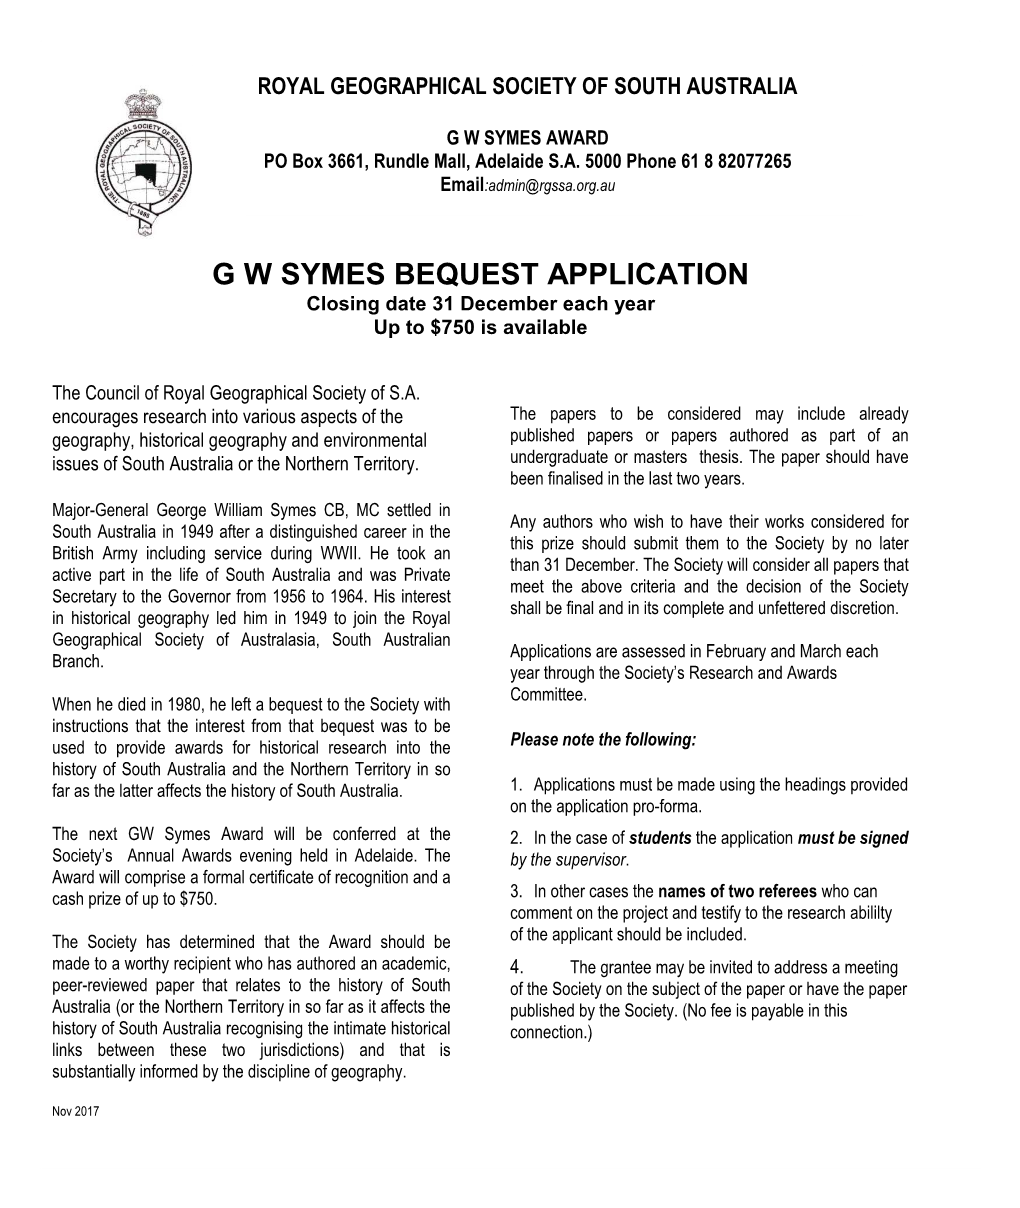 G W SYMES BEQUEST APPLICATION Closing Date 31 December Each Year up to $750 Is Available